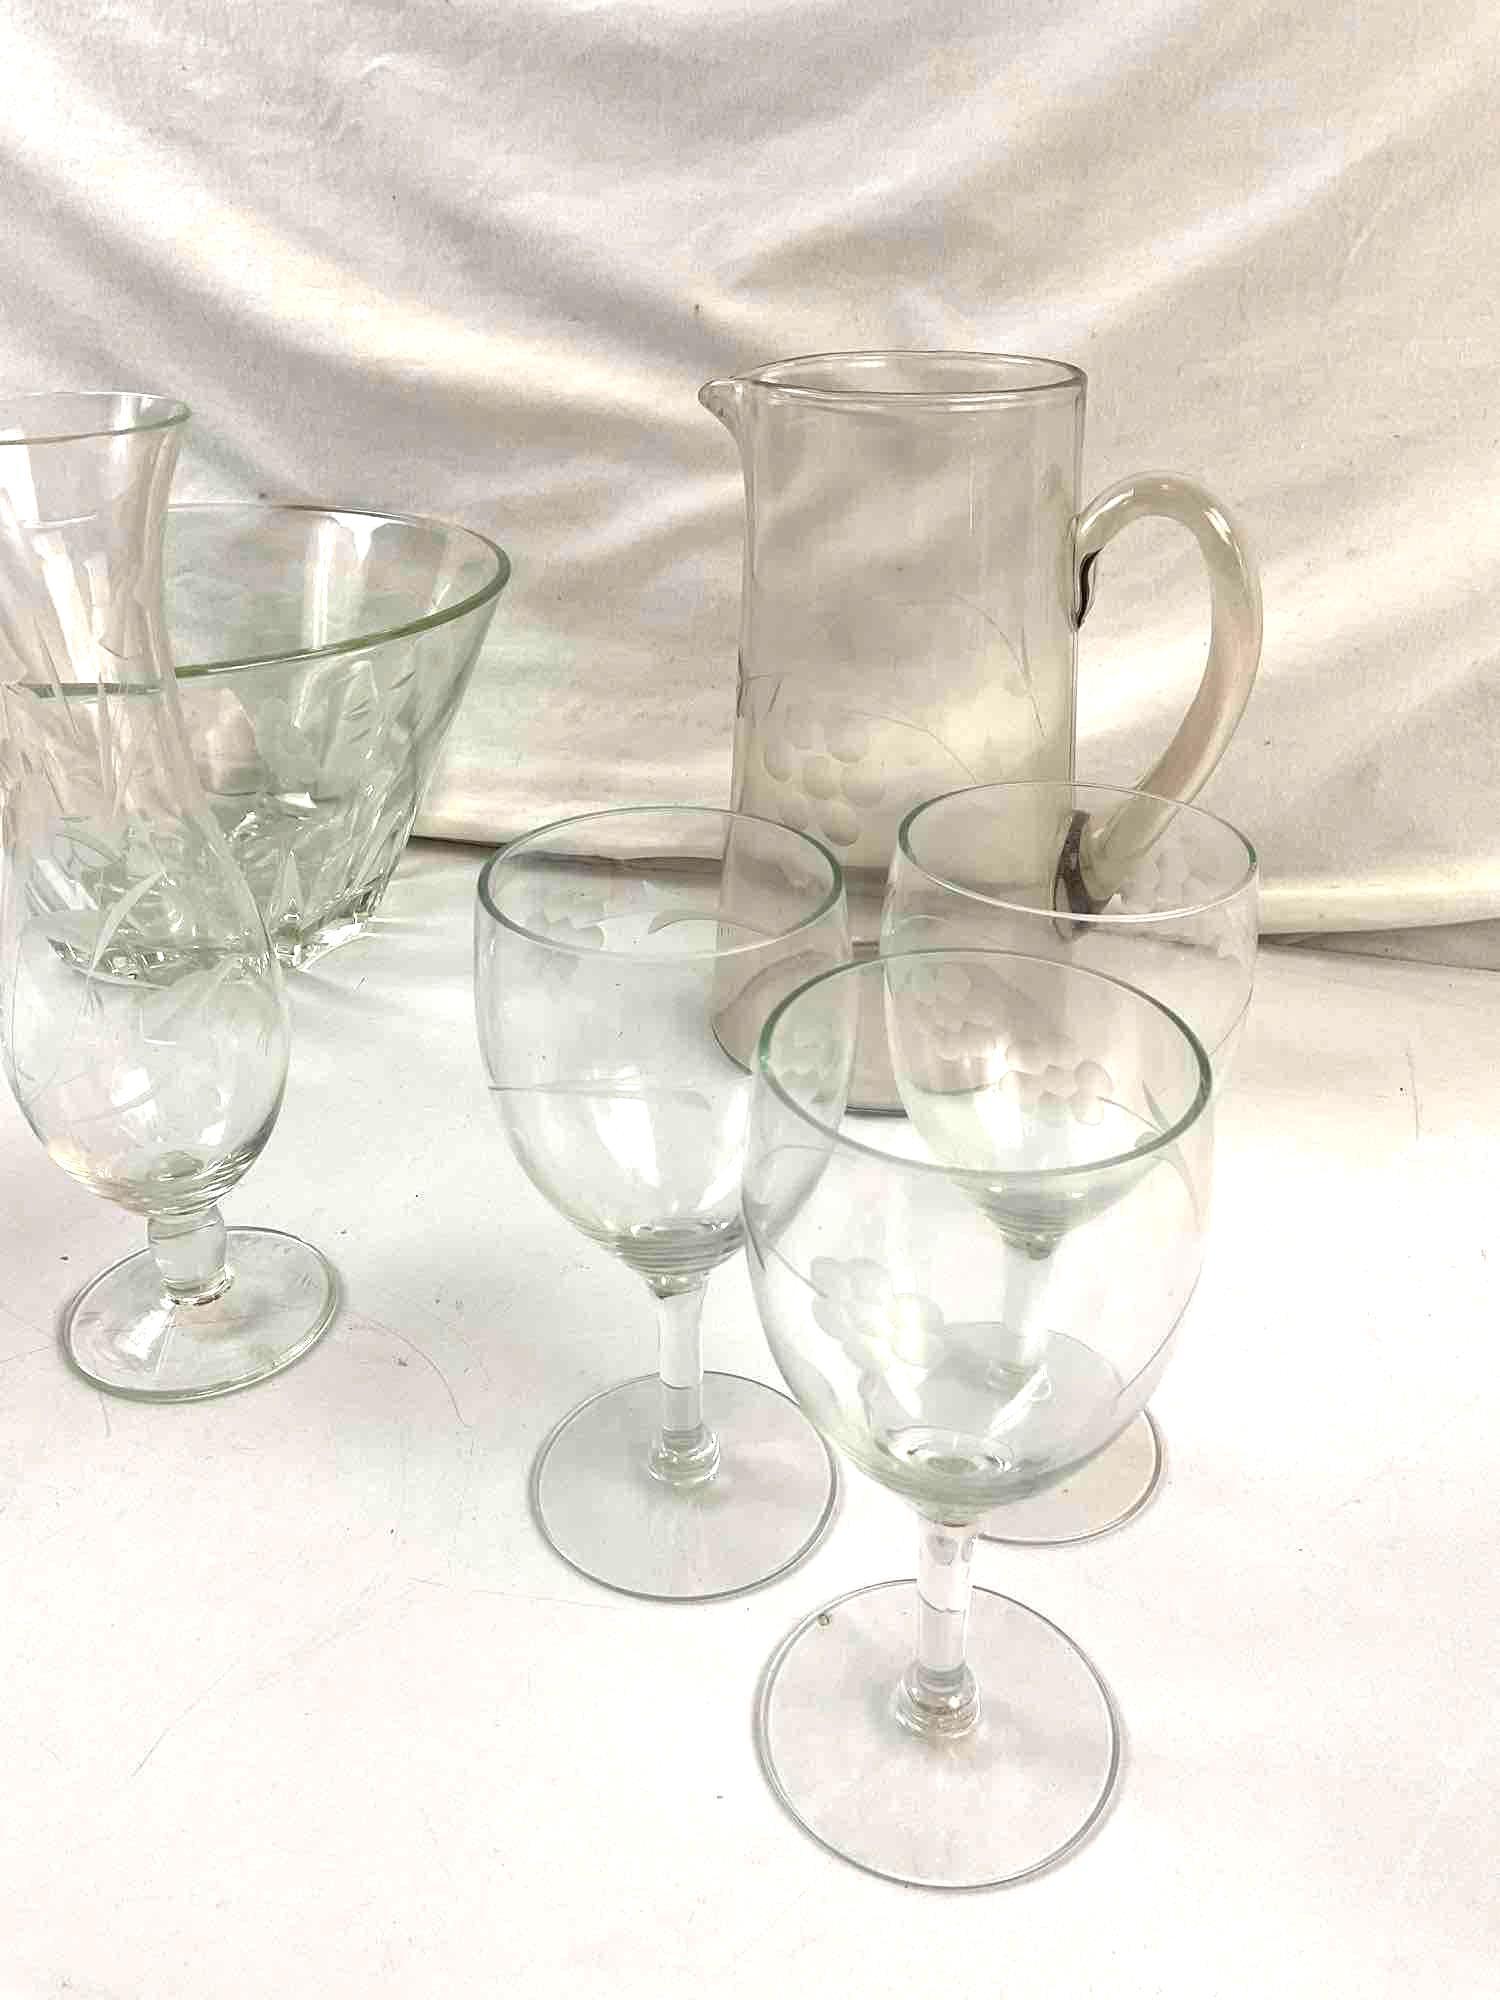 9 pcs Antique Heisey Etched Glass Assortment. Punch Bowl, Pitcher, 6 Glasses & Vase. See pics.